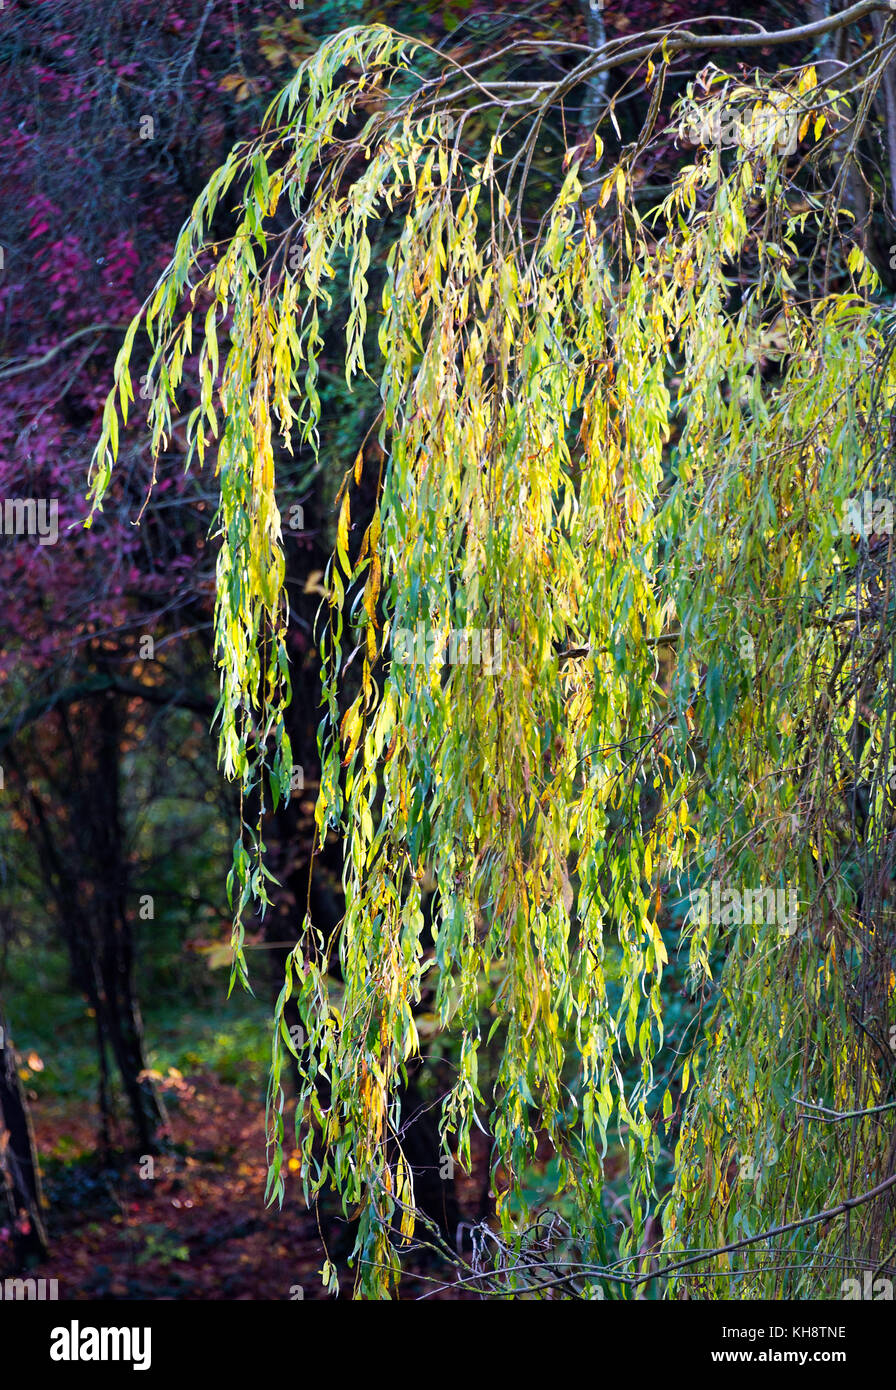 Weeping Willow Tree Branches in Autumn Colours in Shipton under Wychwood Oxfordshire England United Kingdom UK Stock Photo